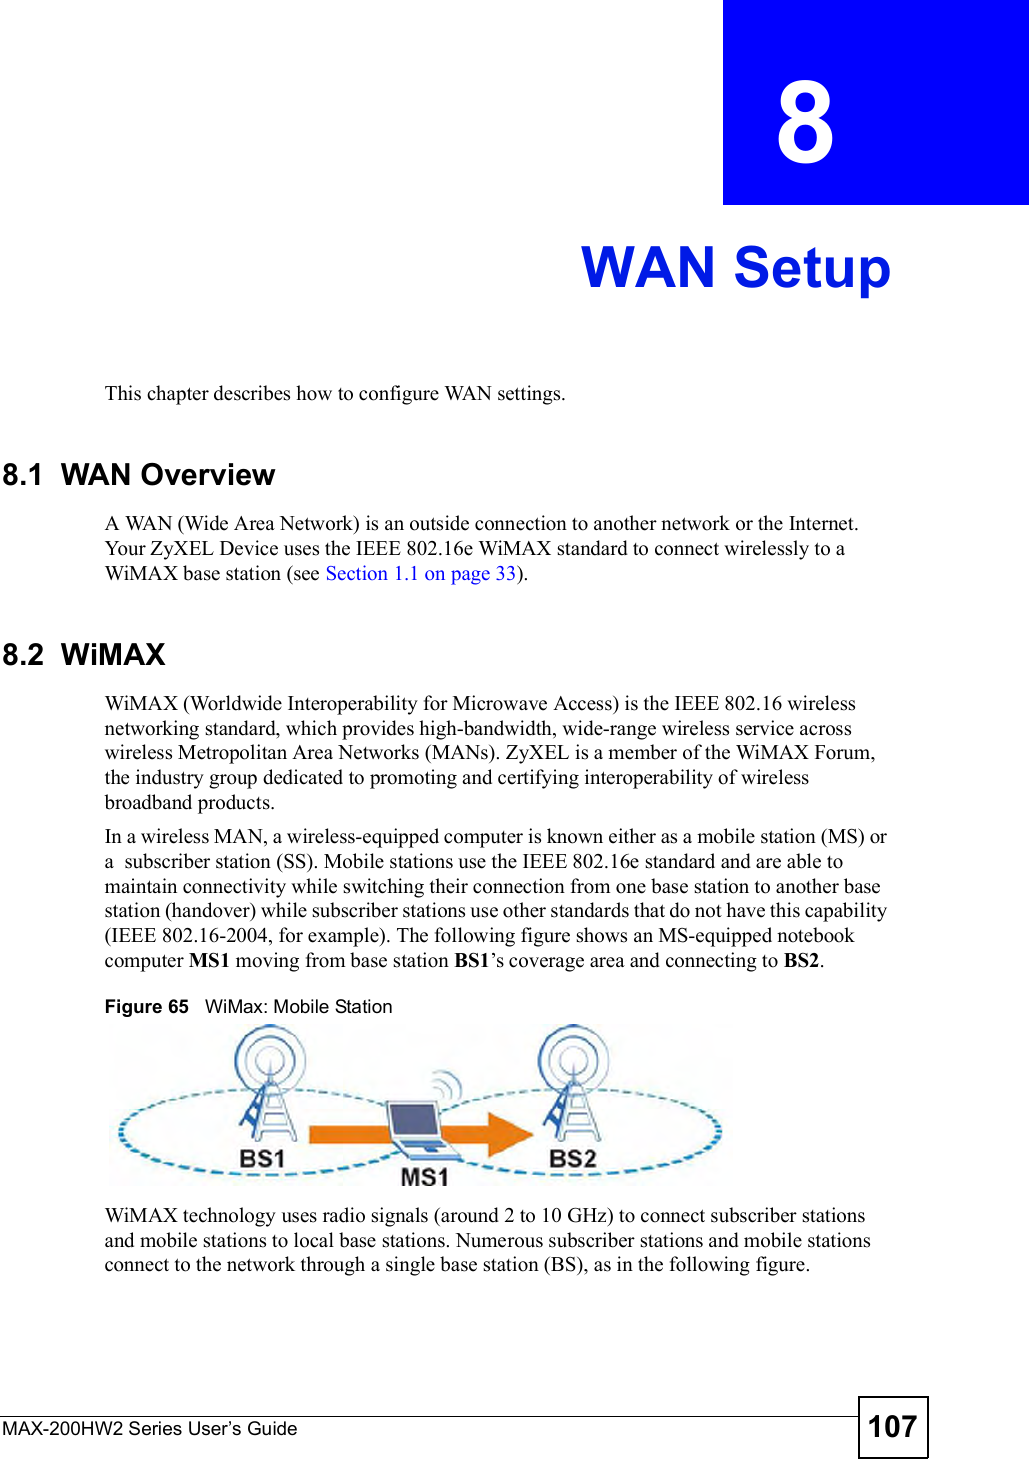 MAX-200HW2 Series User s Guide 107CHAPTER  8 WAN SetupThis chapter describes how to configure WAN settings.8.1  WAN Overview A WAN (Wide Area Network) is an outside connection to another network or the Internet. Your ZyXEL Device uses the IEEE 802.16e WiMAX standard to connect wirelessly to a WiMAX base station (see Section 1.1 on page 33).8.2  WiMAX WiMAX (Worldwide Interoperability for Microwave Access) is the IEEE 802.16 wireless networking standard, which provides high-bandwidth, wide-range wireless service across wireless Metropolitan Area Networks (MANs). ZyXEL is a member of the WiMAX Forum, the industry group dedicated to promoting and certifying interoperability of wireless broadband products.In a wireless MAN, a wireless-equipped computer is known either as a mobile station (MS) or a  subscriber station (SS). Mobile stations use the IEEE 802.16e standard and are able to maintain connectivity while switching their connection from one base station to another base station (handover) while subscriber stations use other standards that do not have this capability (IEEE 802.16-2004, for example). The following figure shows an MS-equipped notebook computer MS1 moving from base station BS1!s coverage area and connecting to BS2.Figure 65   WiMax: Mobile StationWiMAX technology uses radio signals (around 2 to 10 GHz) to connect subscriber stations and mobile stations to local base stations. Numerous subscriber stations and mobile stations connect to the network through a single base station (BS), as in the following figure. 